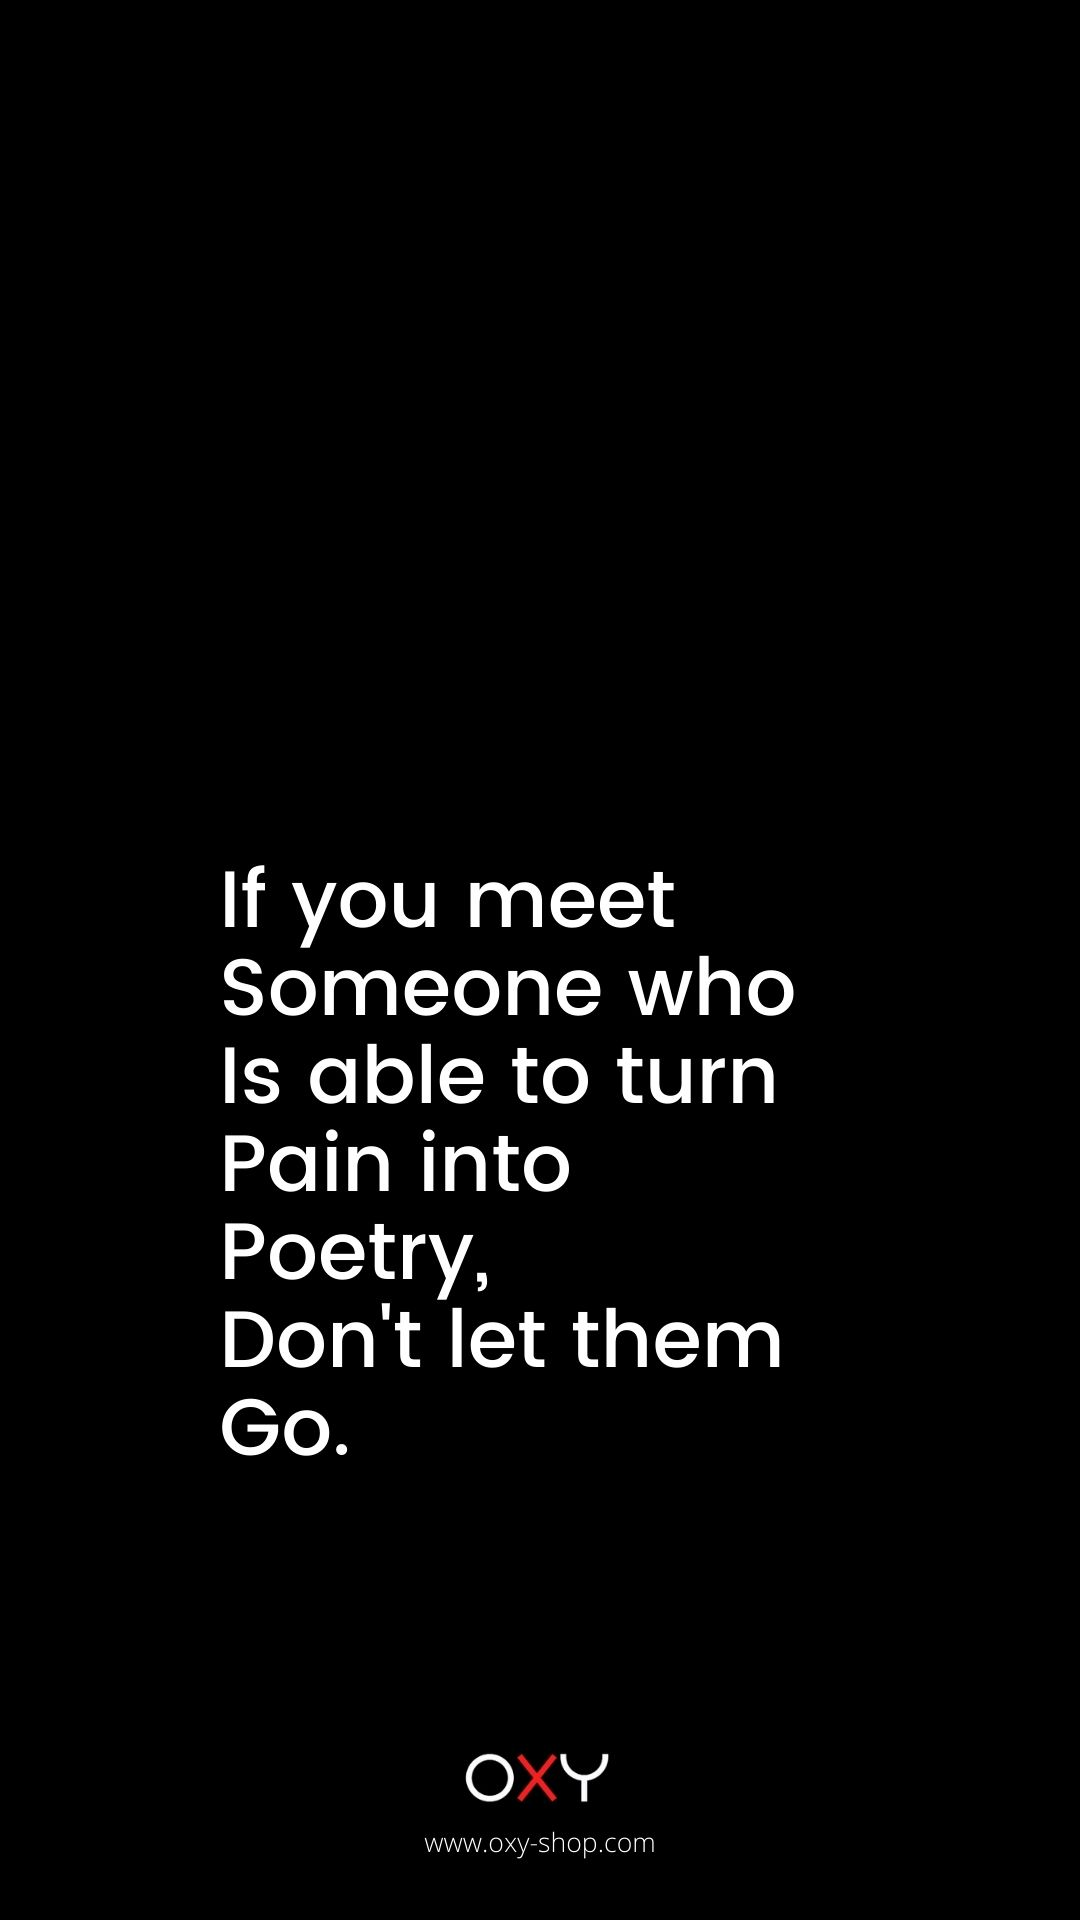 If you meet someone who is able to turn pain into poetry, do not let them go. - BDSM wallpaper